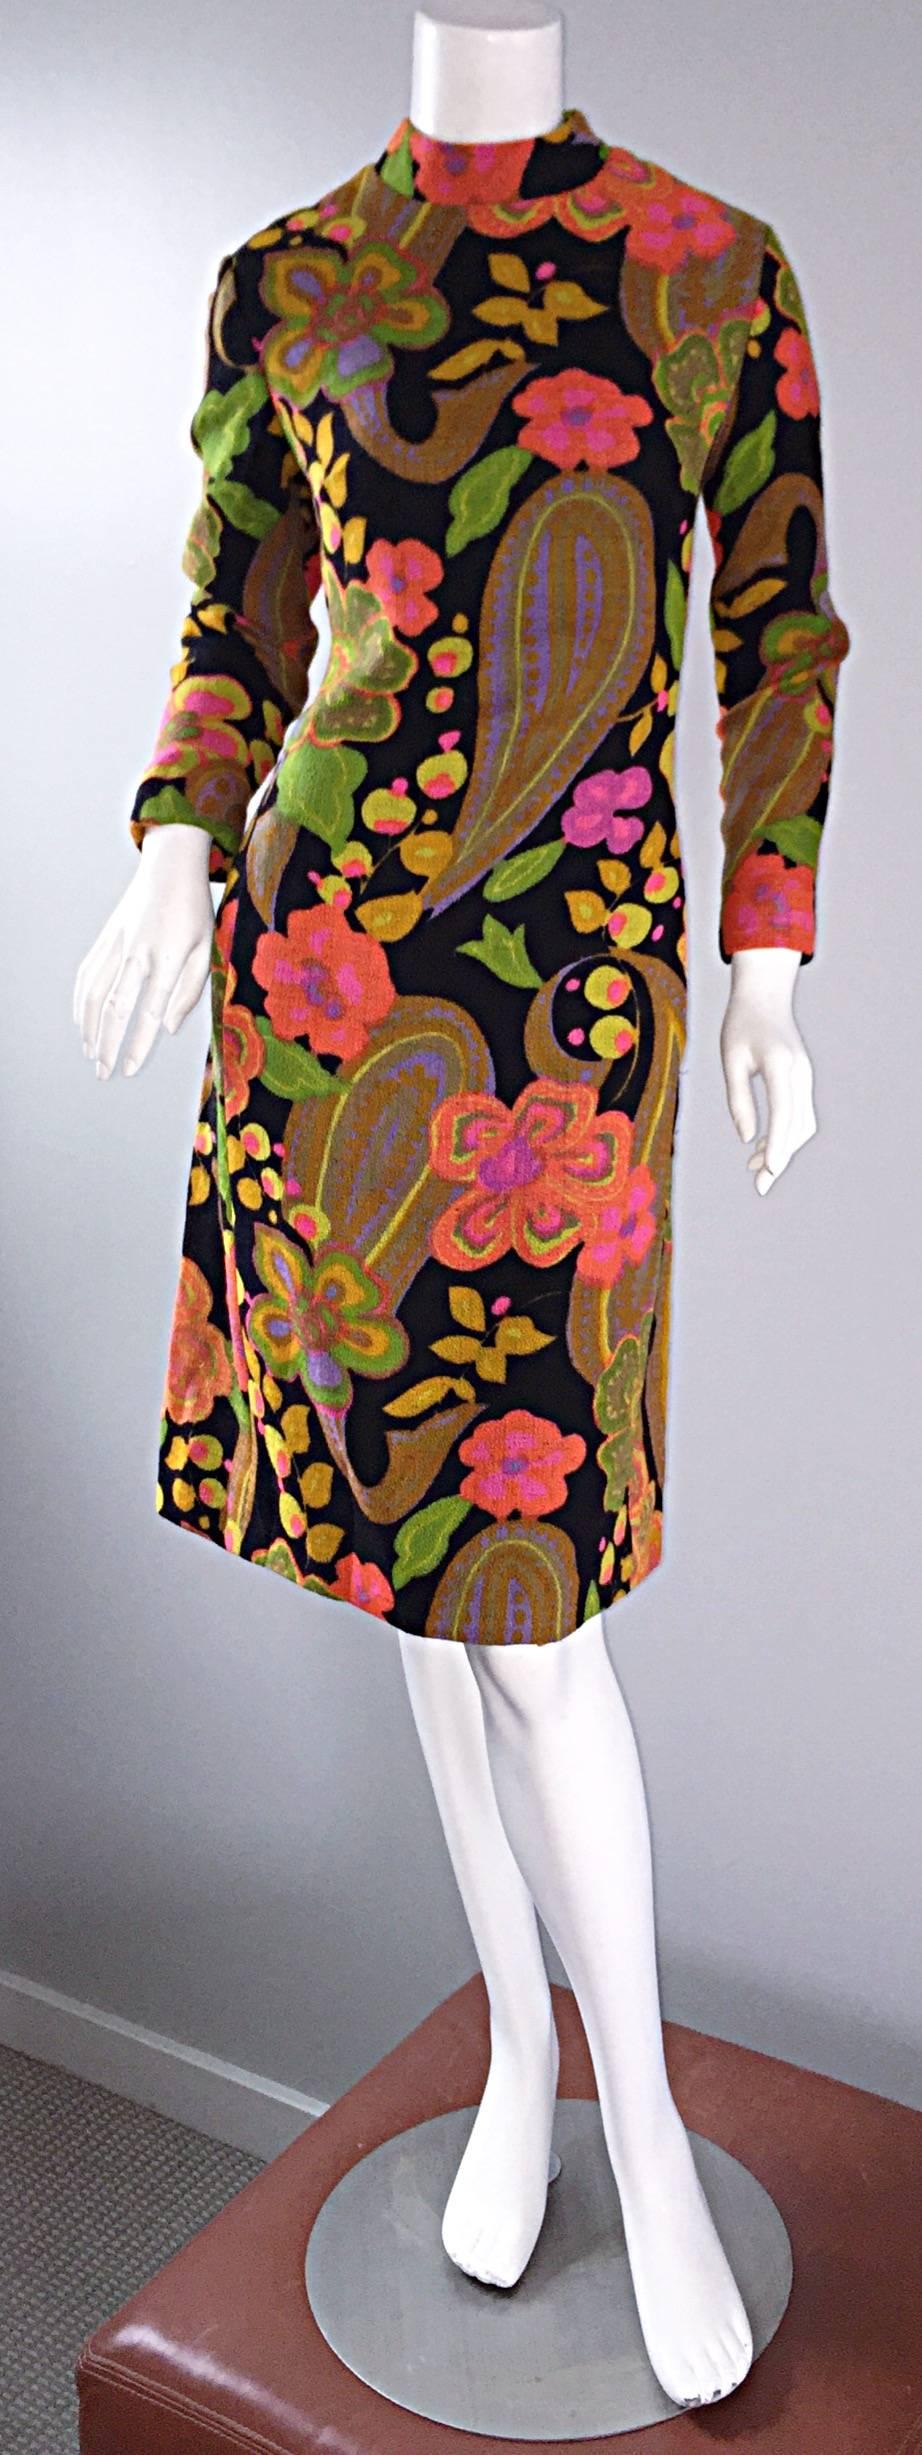 Brown 1960s 60s Psychedelic Flowers + Paisley Colorful Print Mod Retro A - Line Dress For Sale